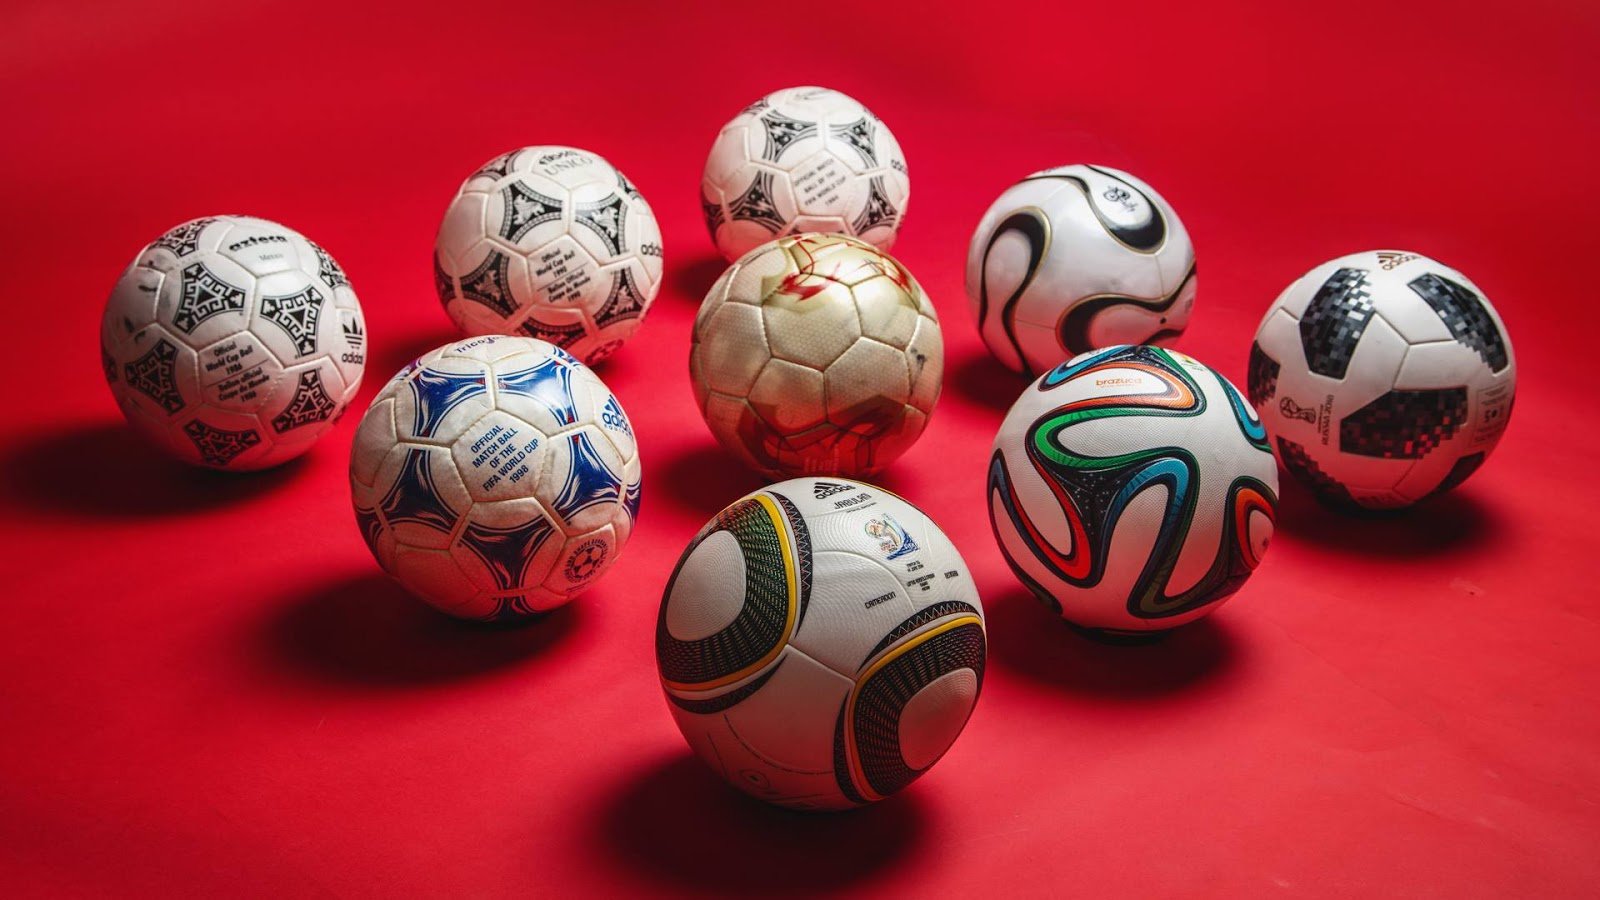 The 20 best footballs ever